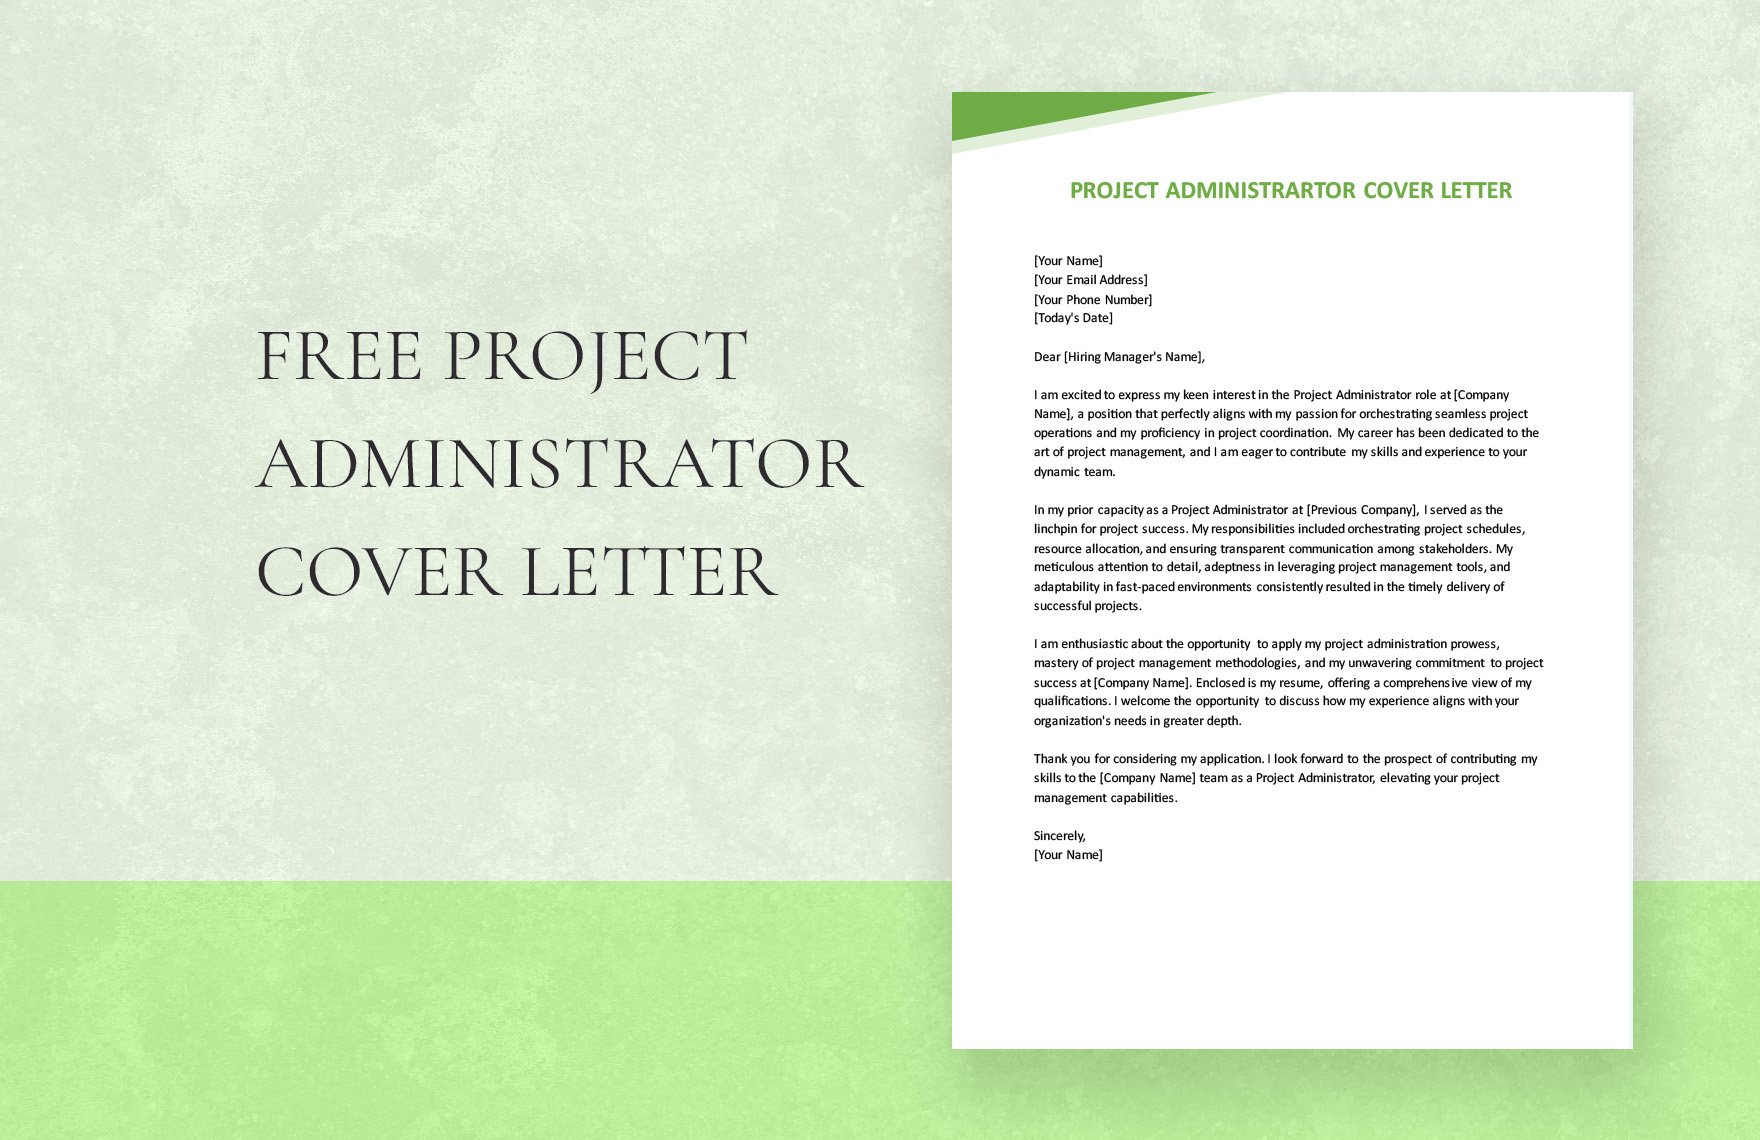 Project Administrator Cover Letter